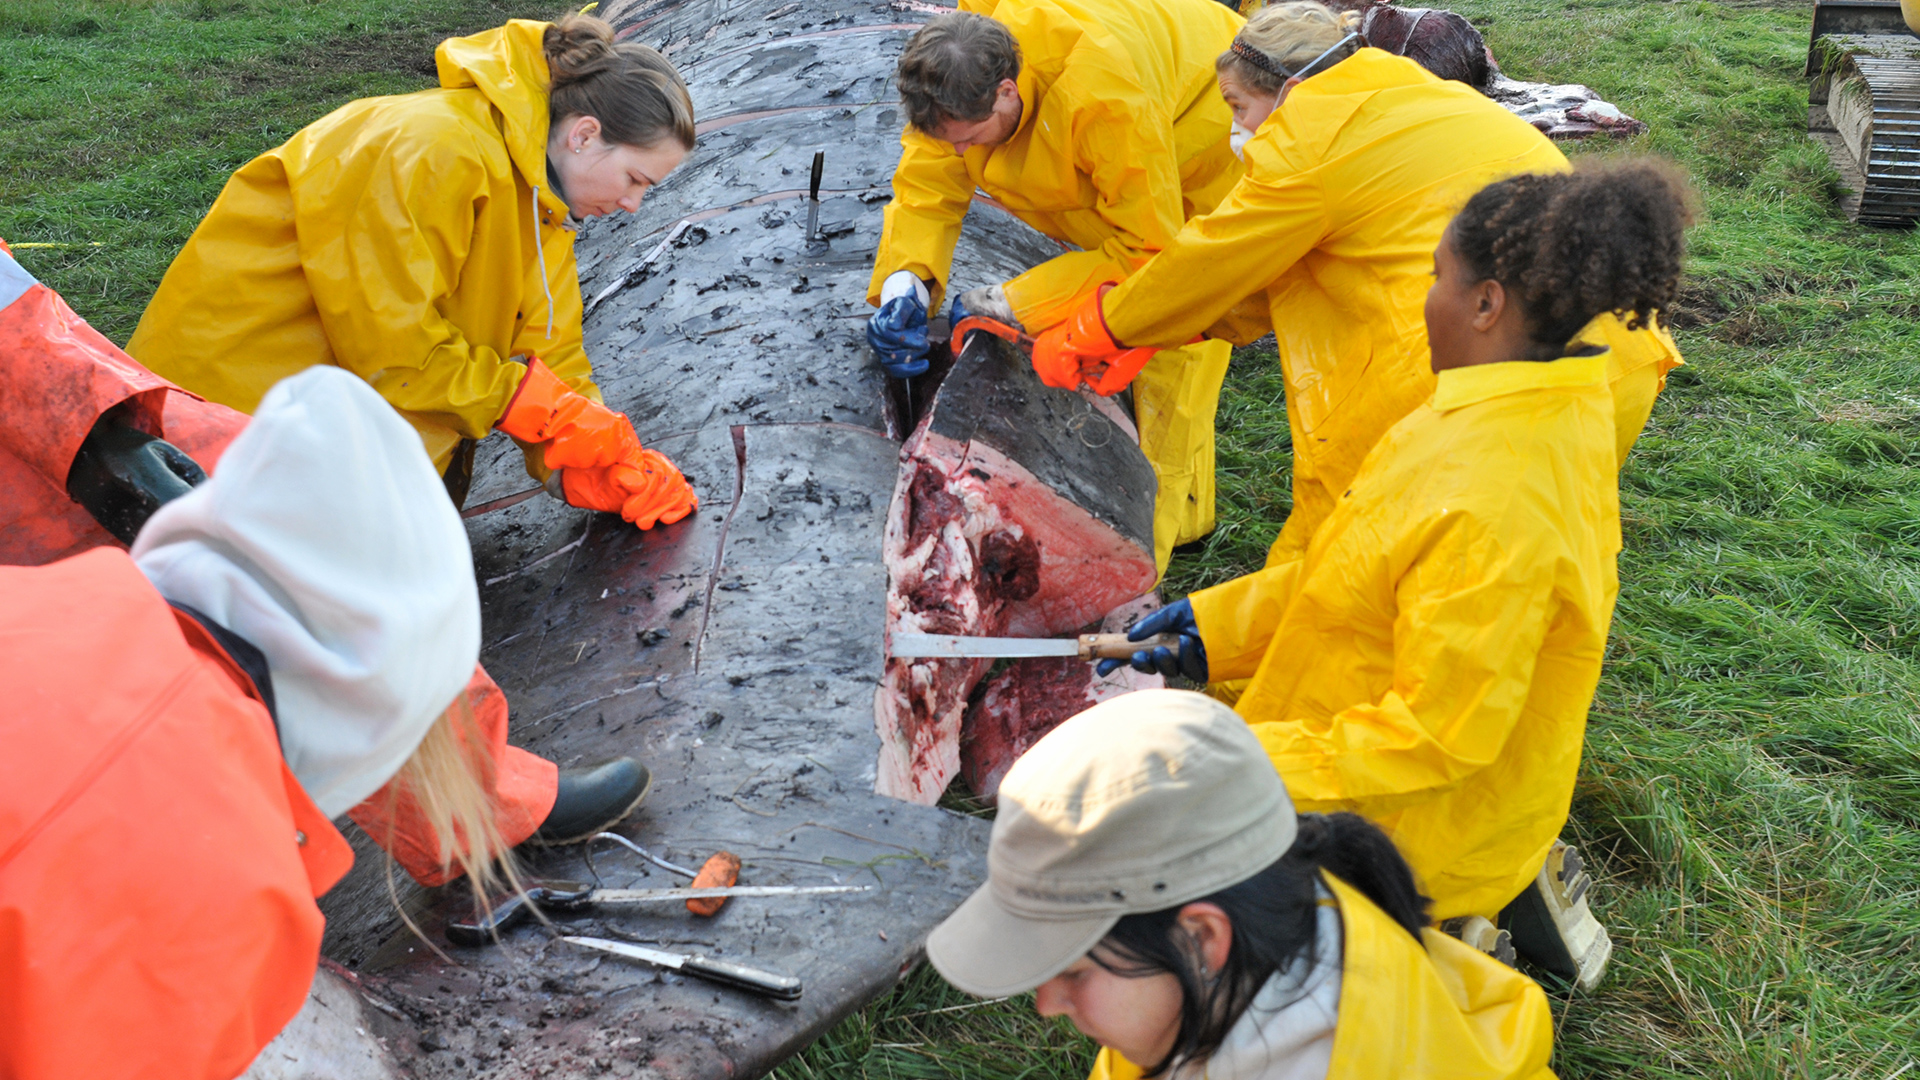 Several individuals are busy carving off huge chunks of flesh from the fin whale carcass.